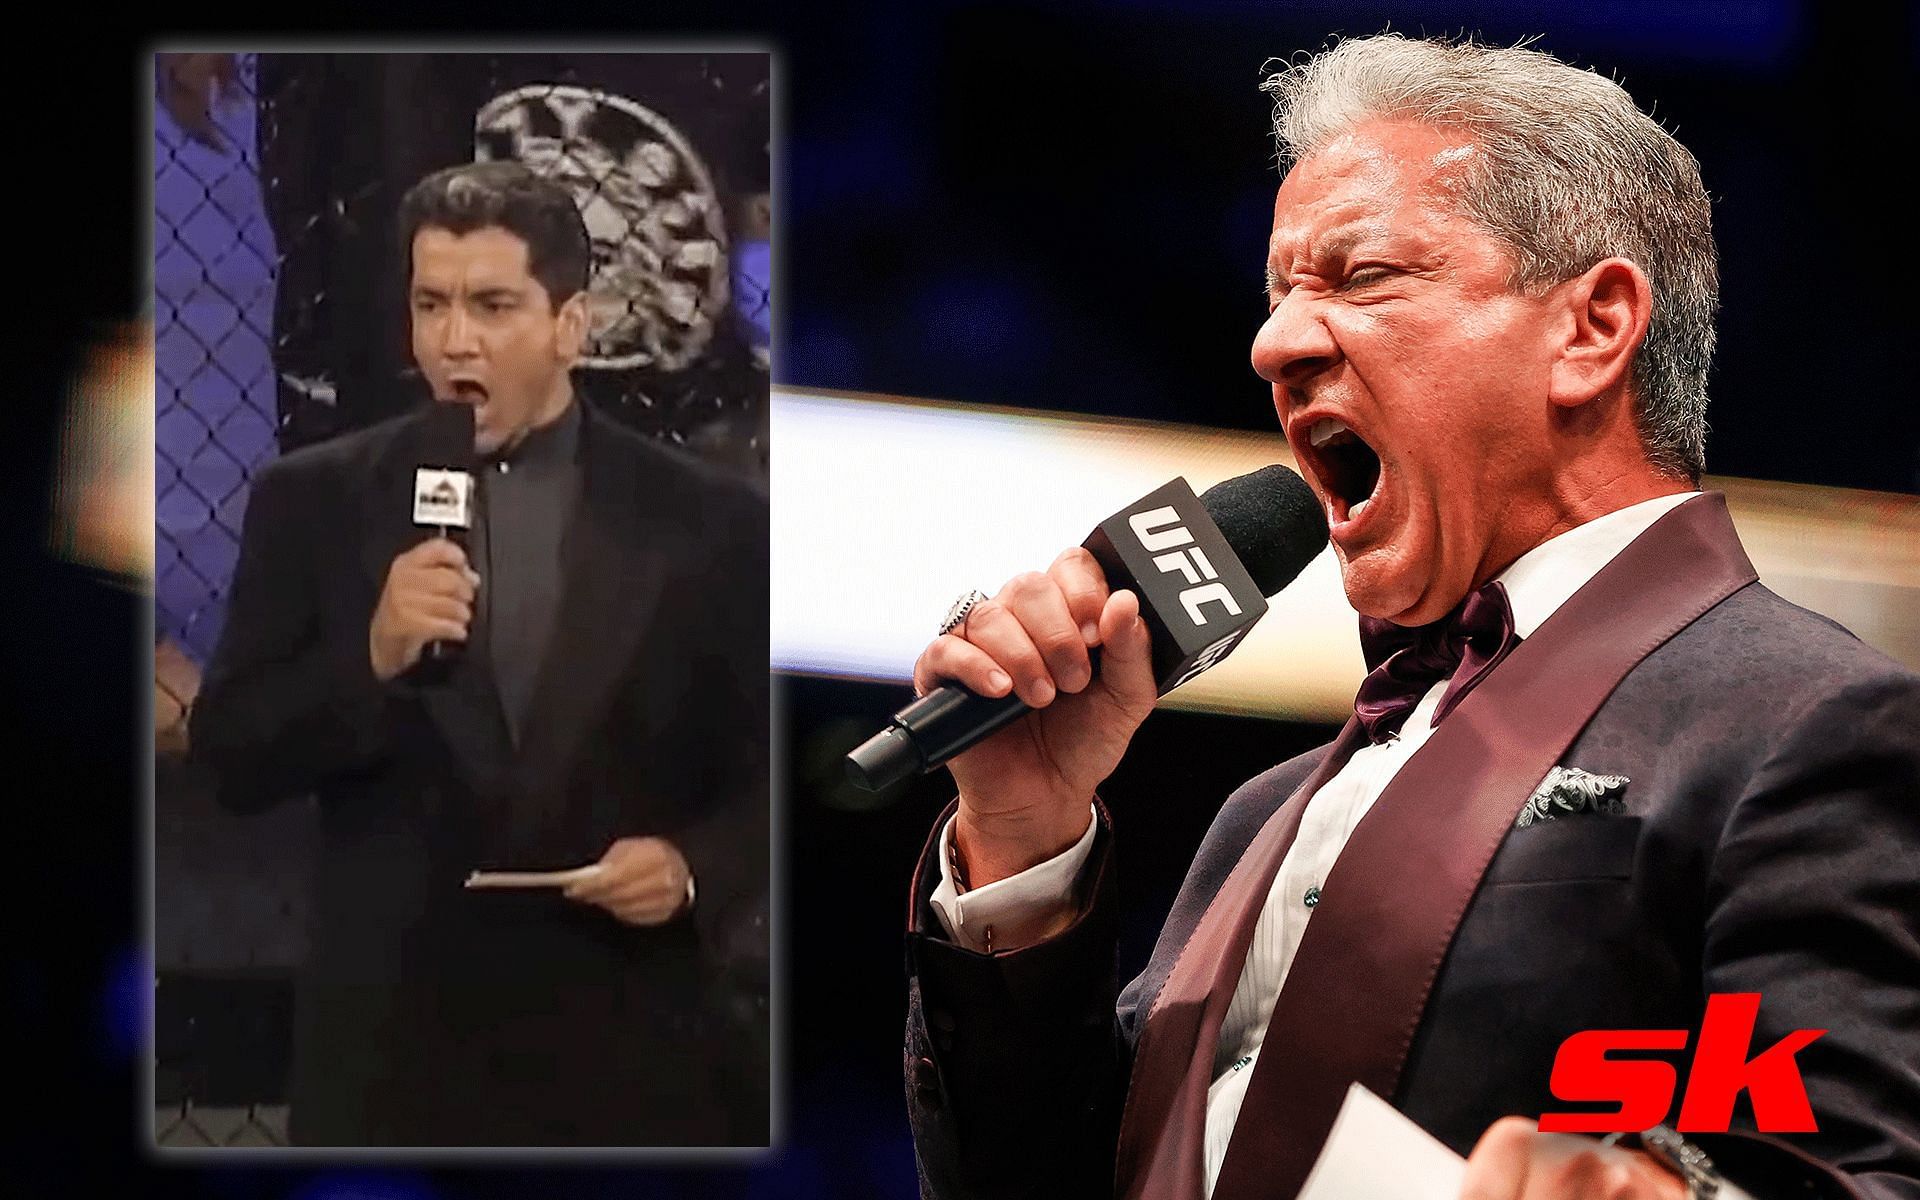 Fans left amused by a young Bruce Buffer on UFC debut 26 years ago